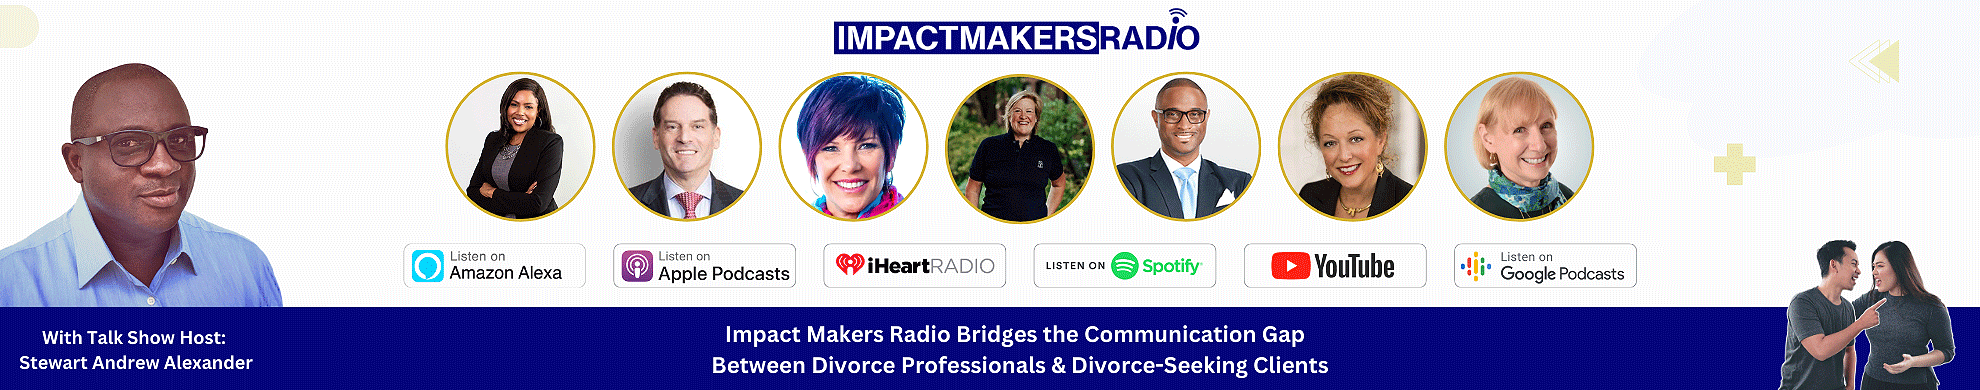 Impact Makers Radio Show with Talk Show Host Stewart Andrew Alexander